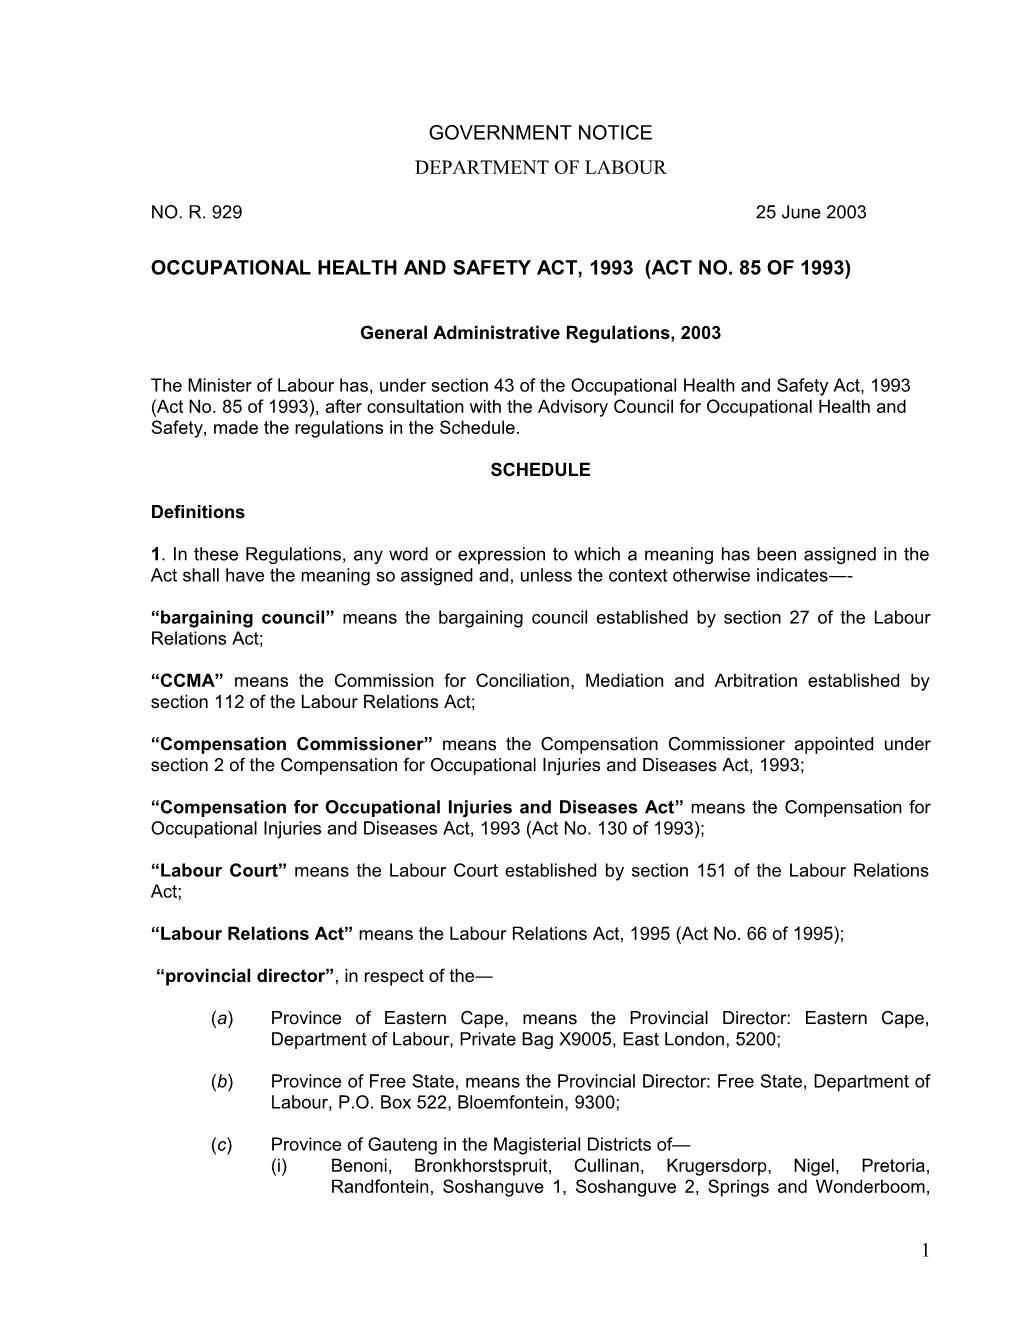 Occupational Health and Safety Act, 1993